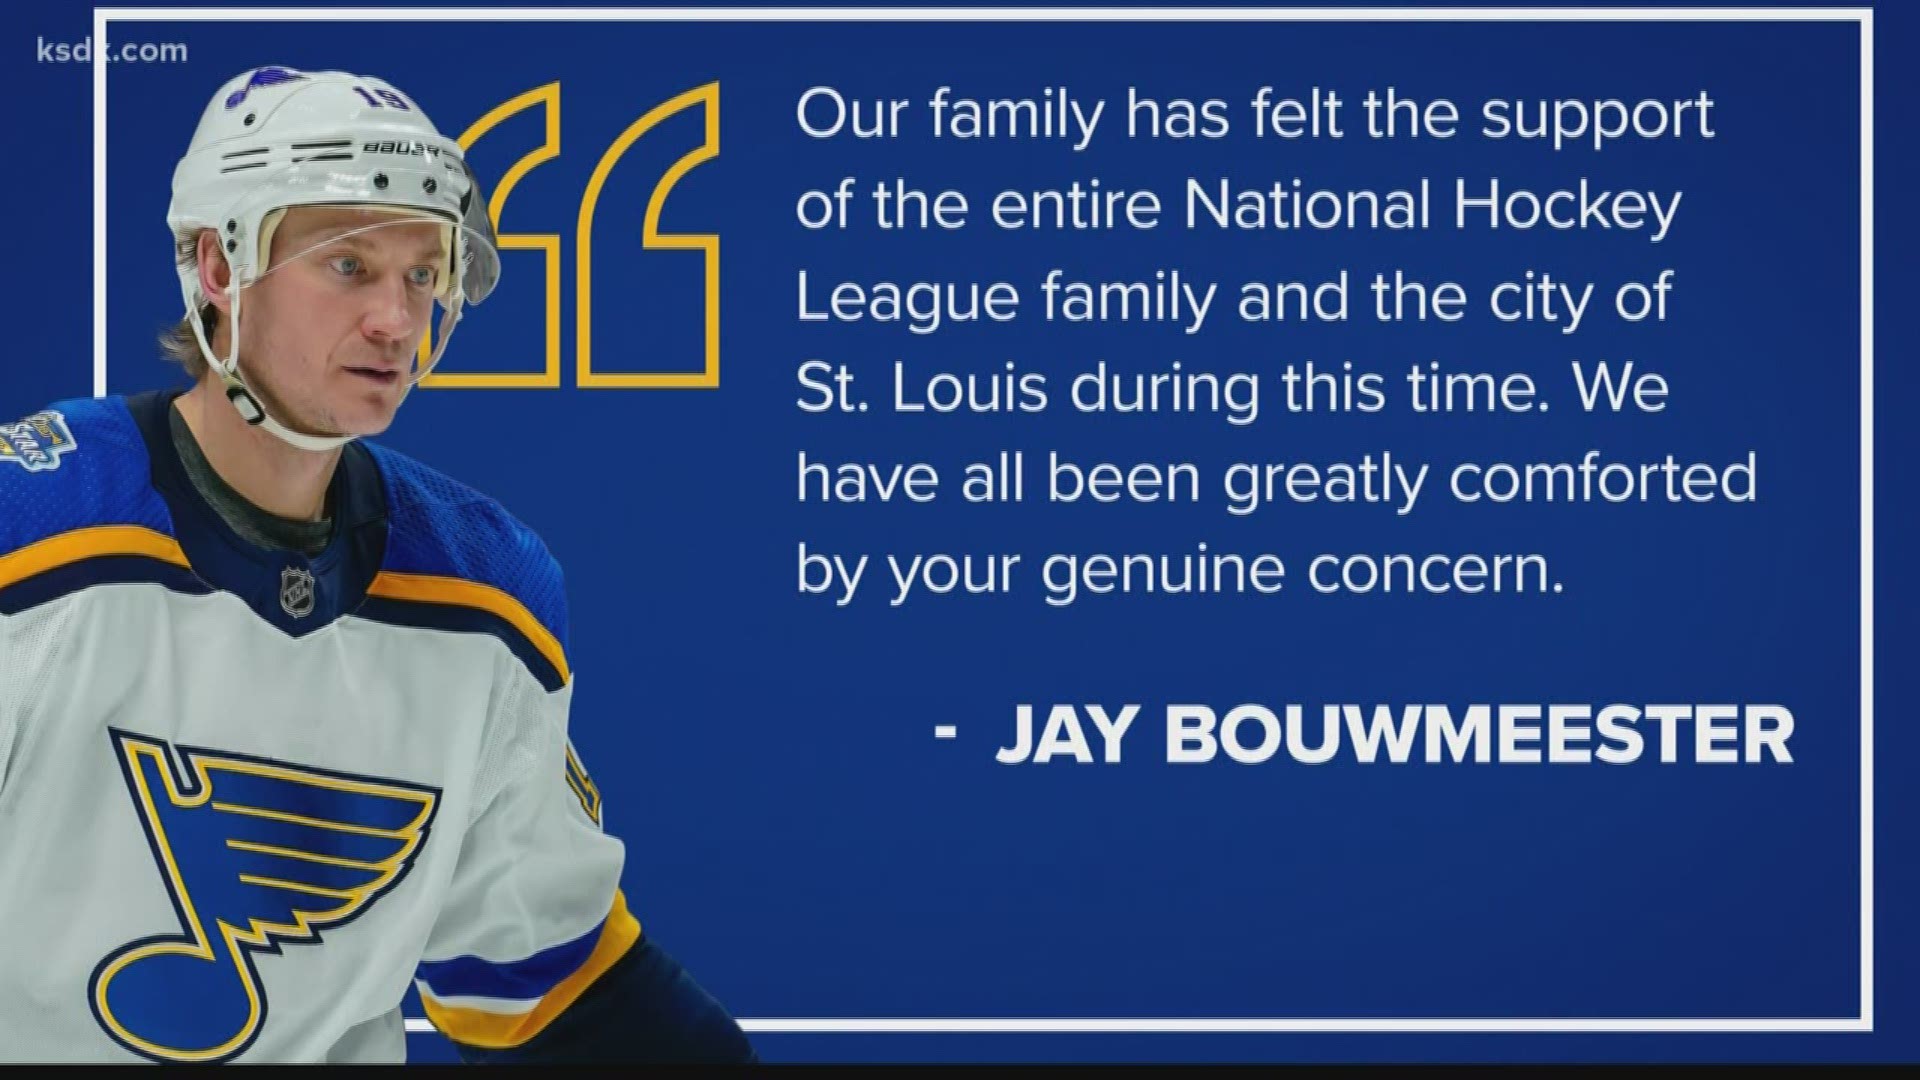 After being in an Anaheim hospital for a few days, Bouwmeester flew back to St. Louis on Sunday.